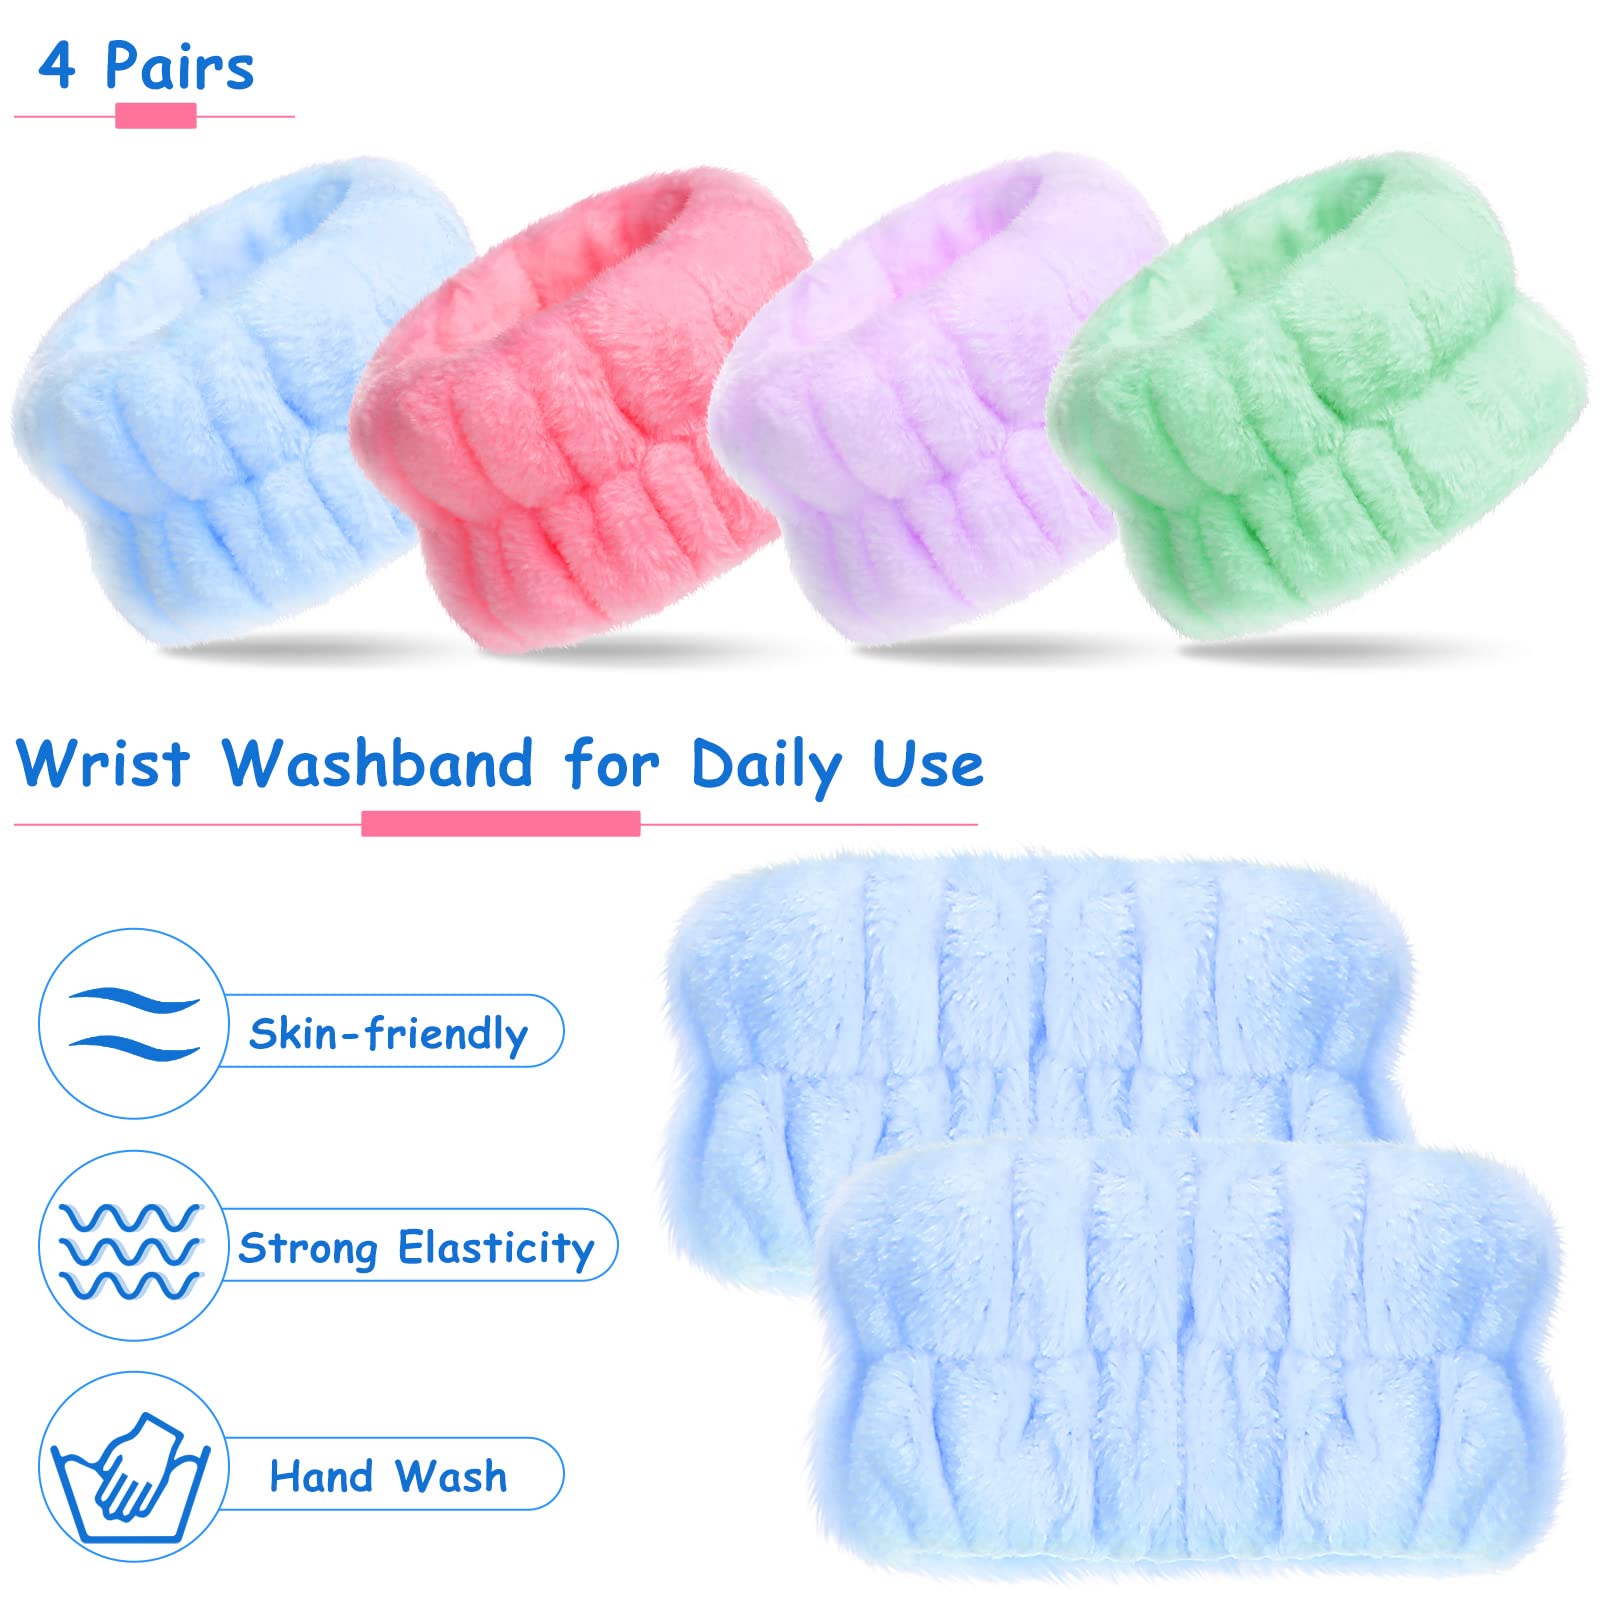 4 Pairs Wrist Spa Washband Microfiber Washing Face Wrist Wash Towel Band Wristband Scrunchies Absorbent Wrist Sweatband for Women Prevent Liquid from Spilling (Fresh Colors,Classic Style)